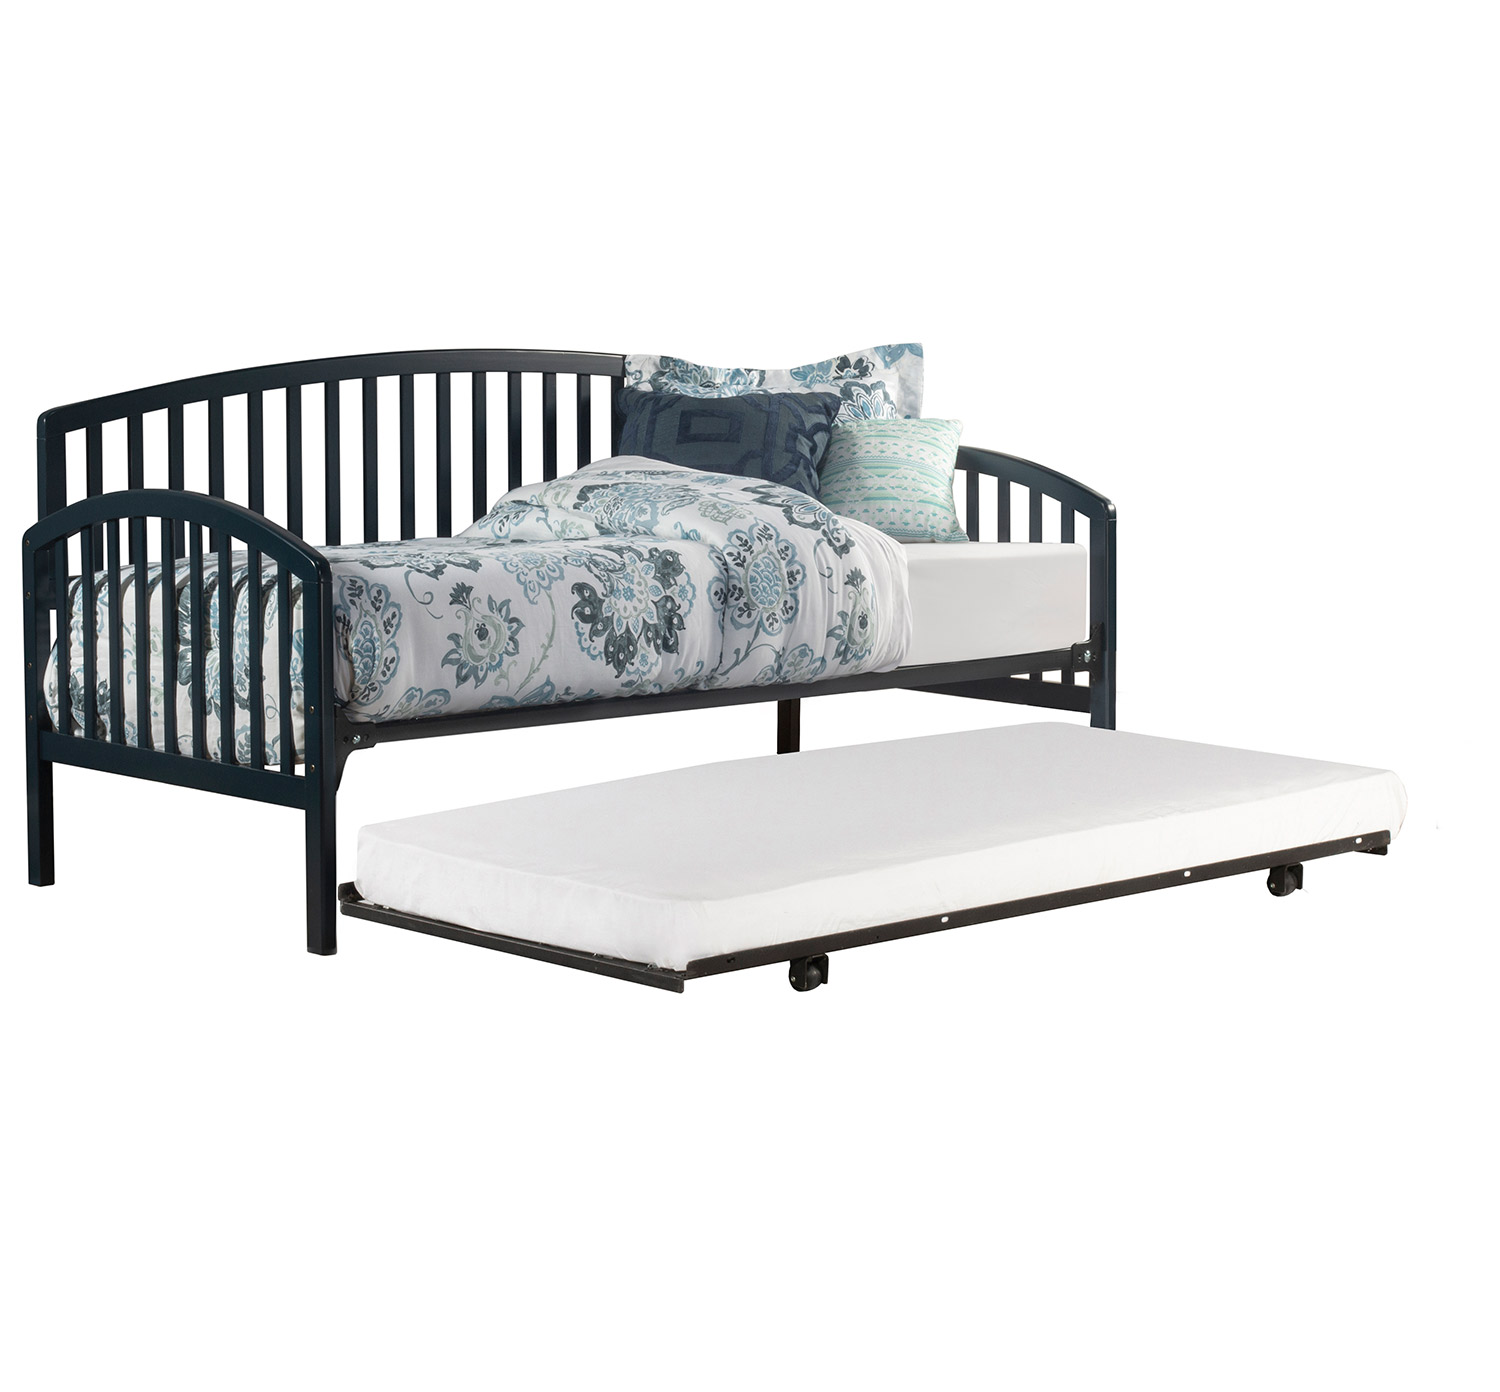 Hillsdale Carolina Daybed with Roll Out Trundle Unit - Navy